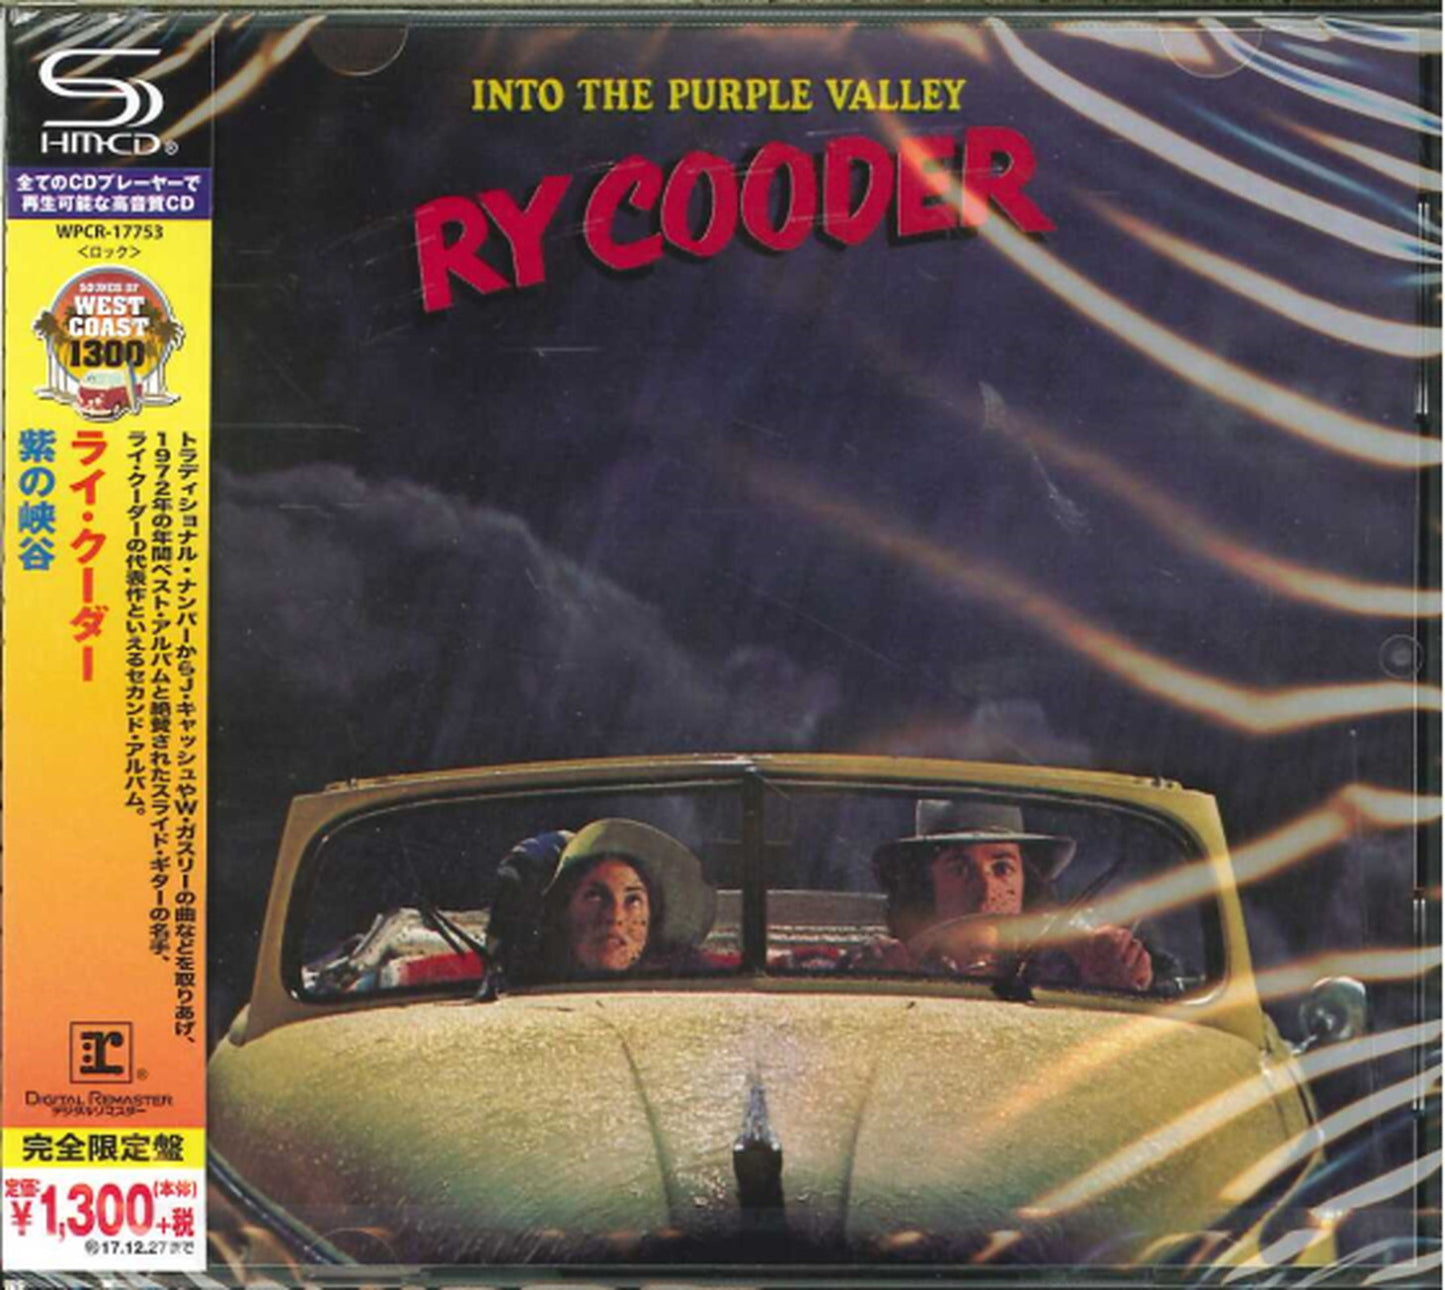 Ry Cooder - Into The Purple Valley - Japan  SHM-CD Limited Edition